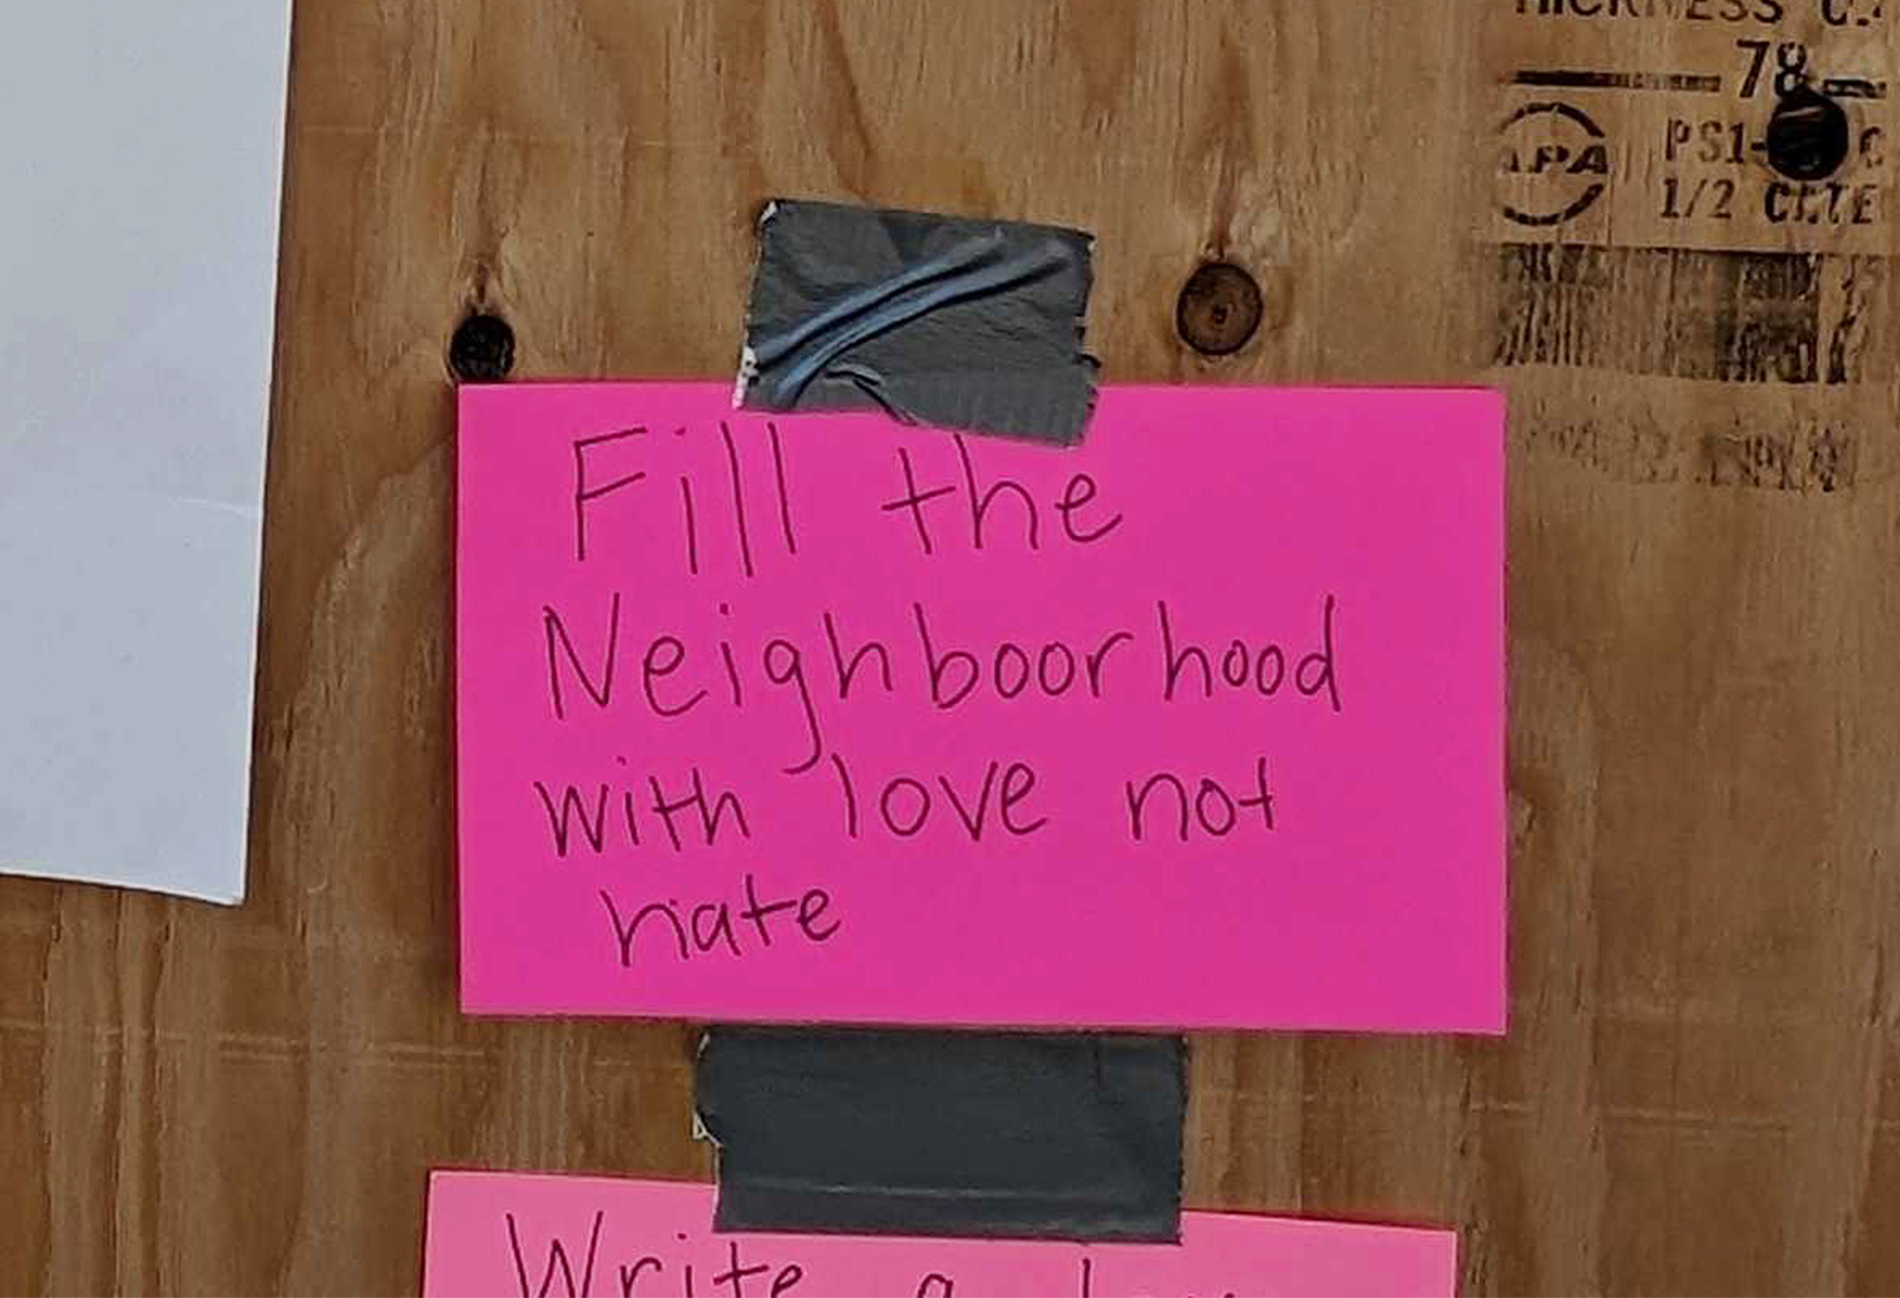 A neon pink card taped to a wooden board reads, &quot;Fill the Neighboorhood with love not hate,&quot; in handwritten text.